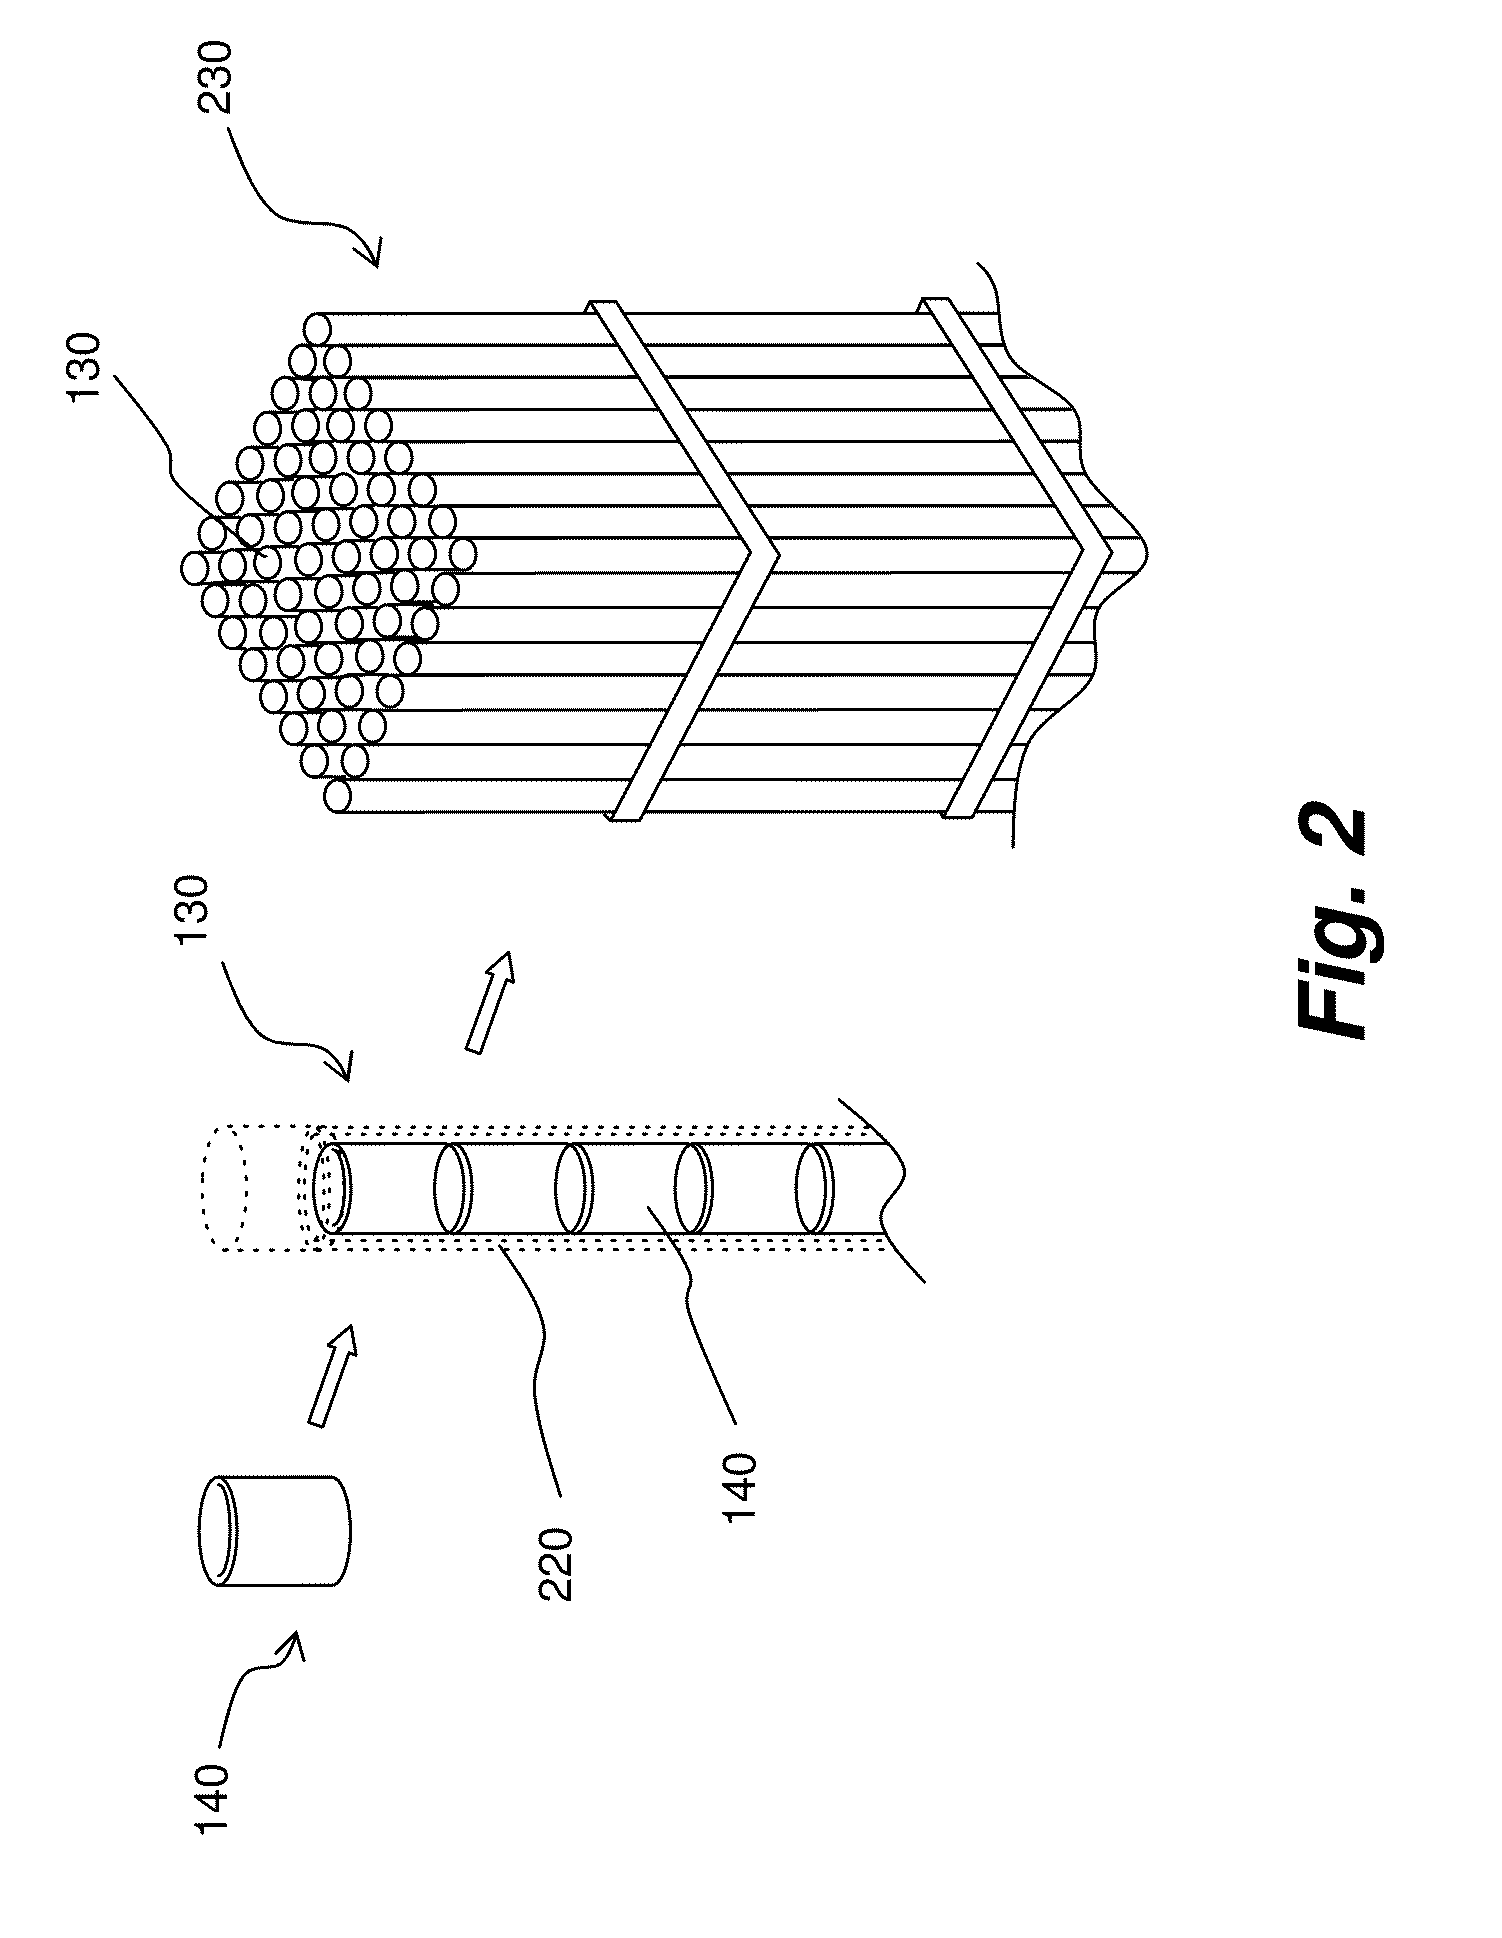 Nuclear fuel assembly and related methods for spent nuclear fuel reprocessing and management